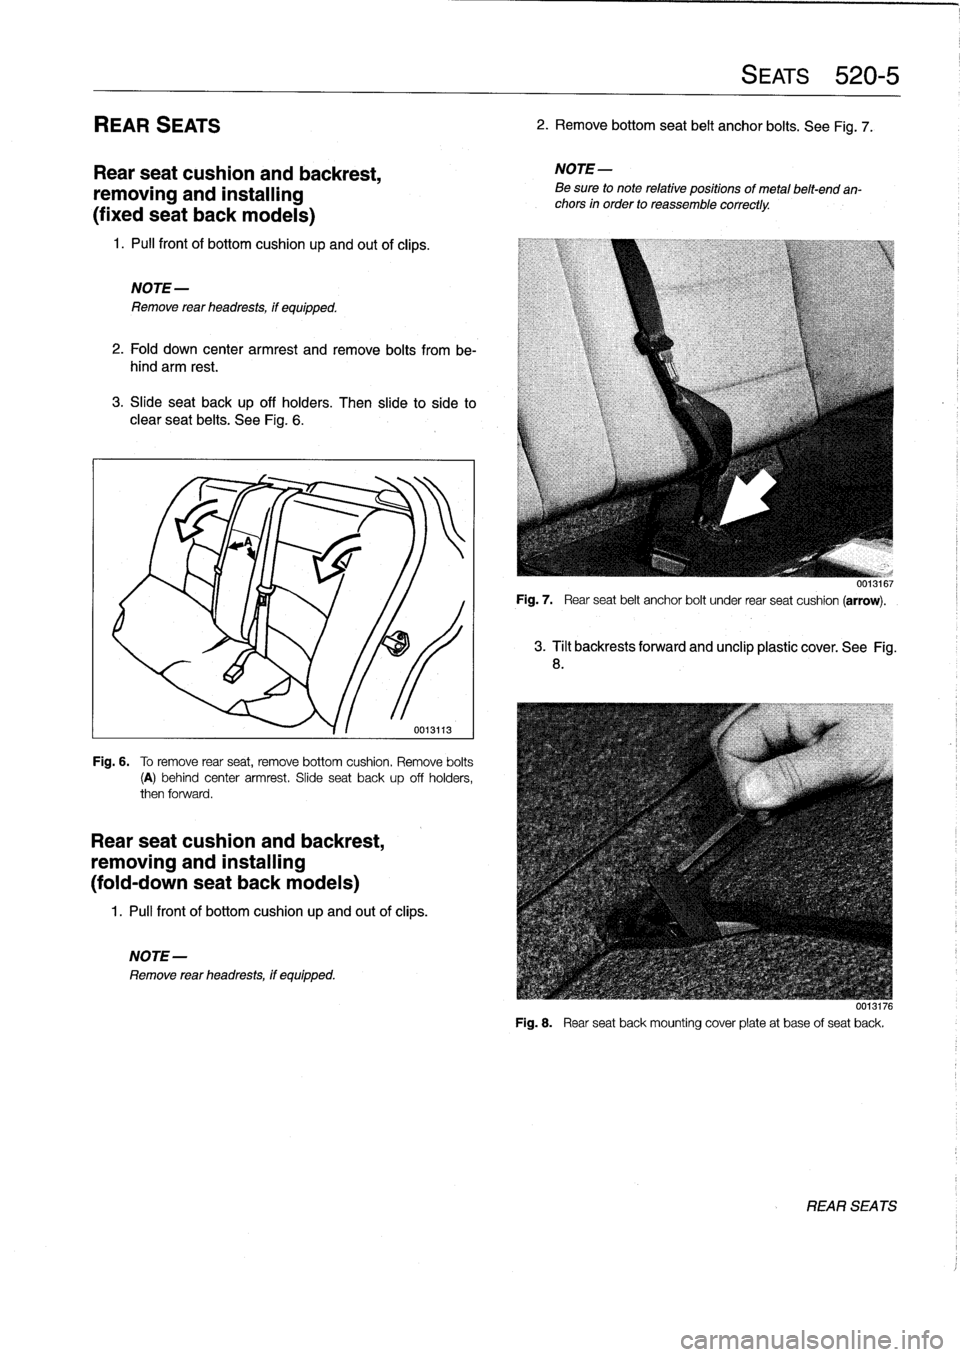 BMW 325i 1996 E36 Workshop Manual 
REAR
SEATS

Rear
seat
cushion
and
backrest,

removing
and
installing

(fixed
seat
back
modeis)

1
.
Pull
front
of
bottomcushion
up
and
out
of
clips
.

NOTE-

Remove
rear
headrests,
if
equipped
.

2
.